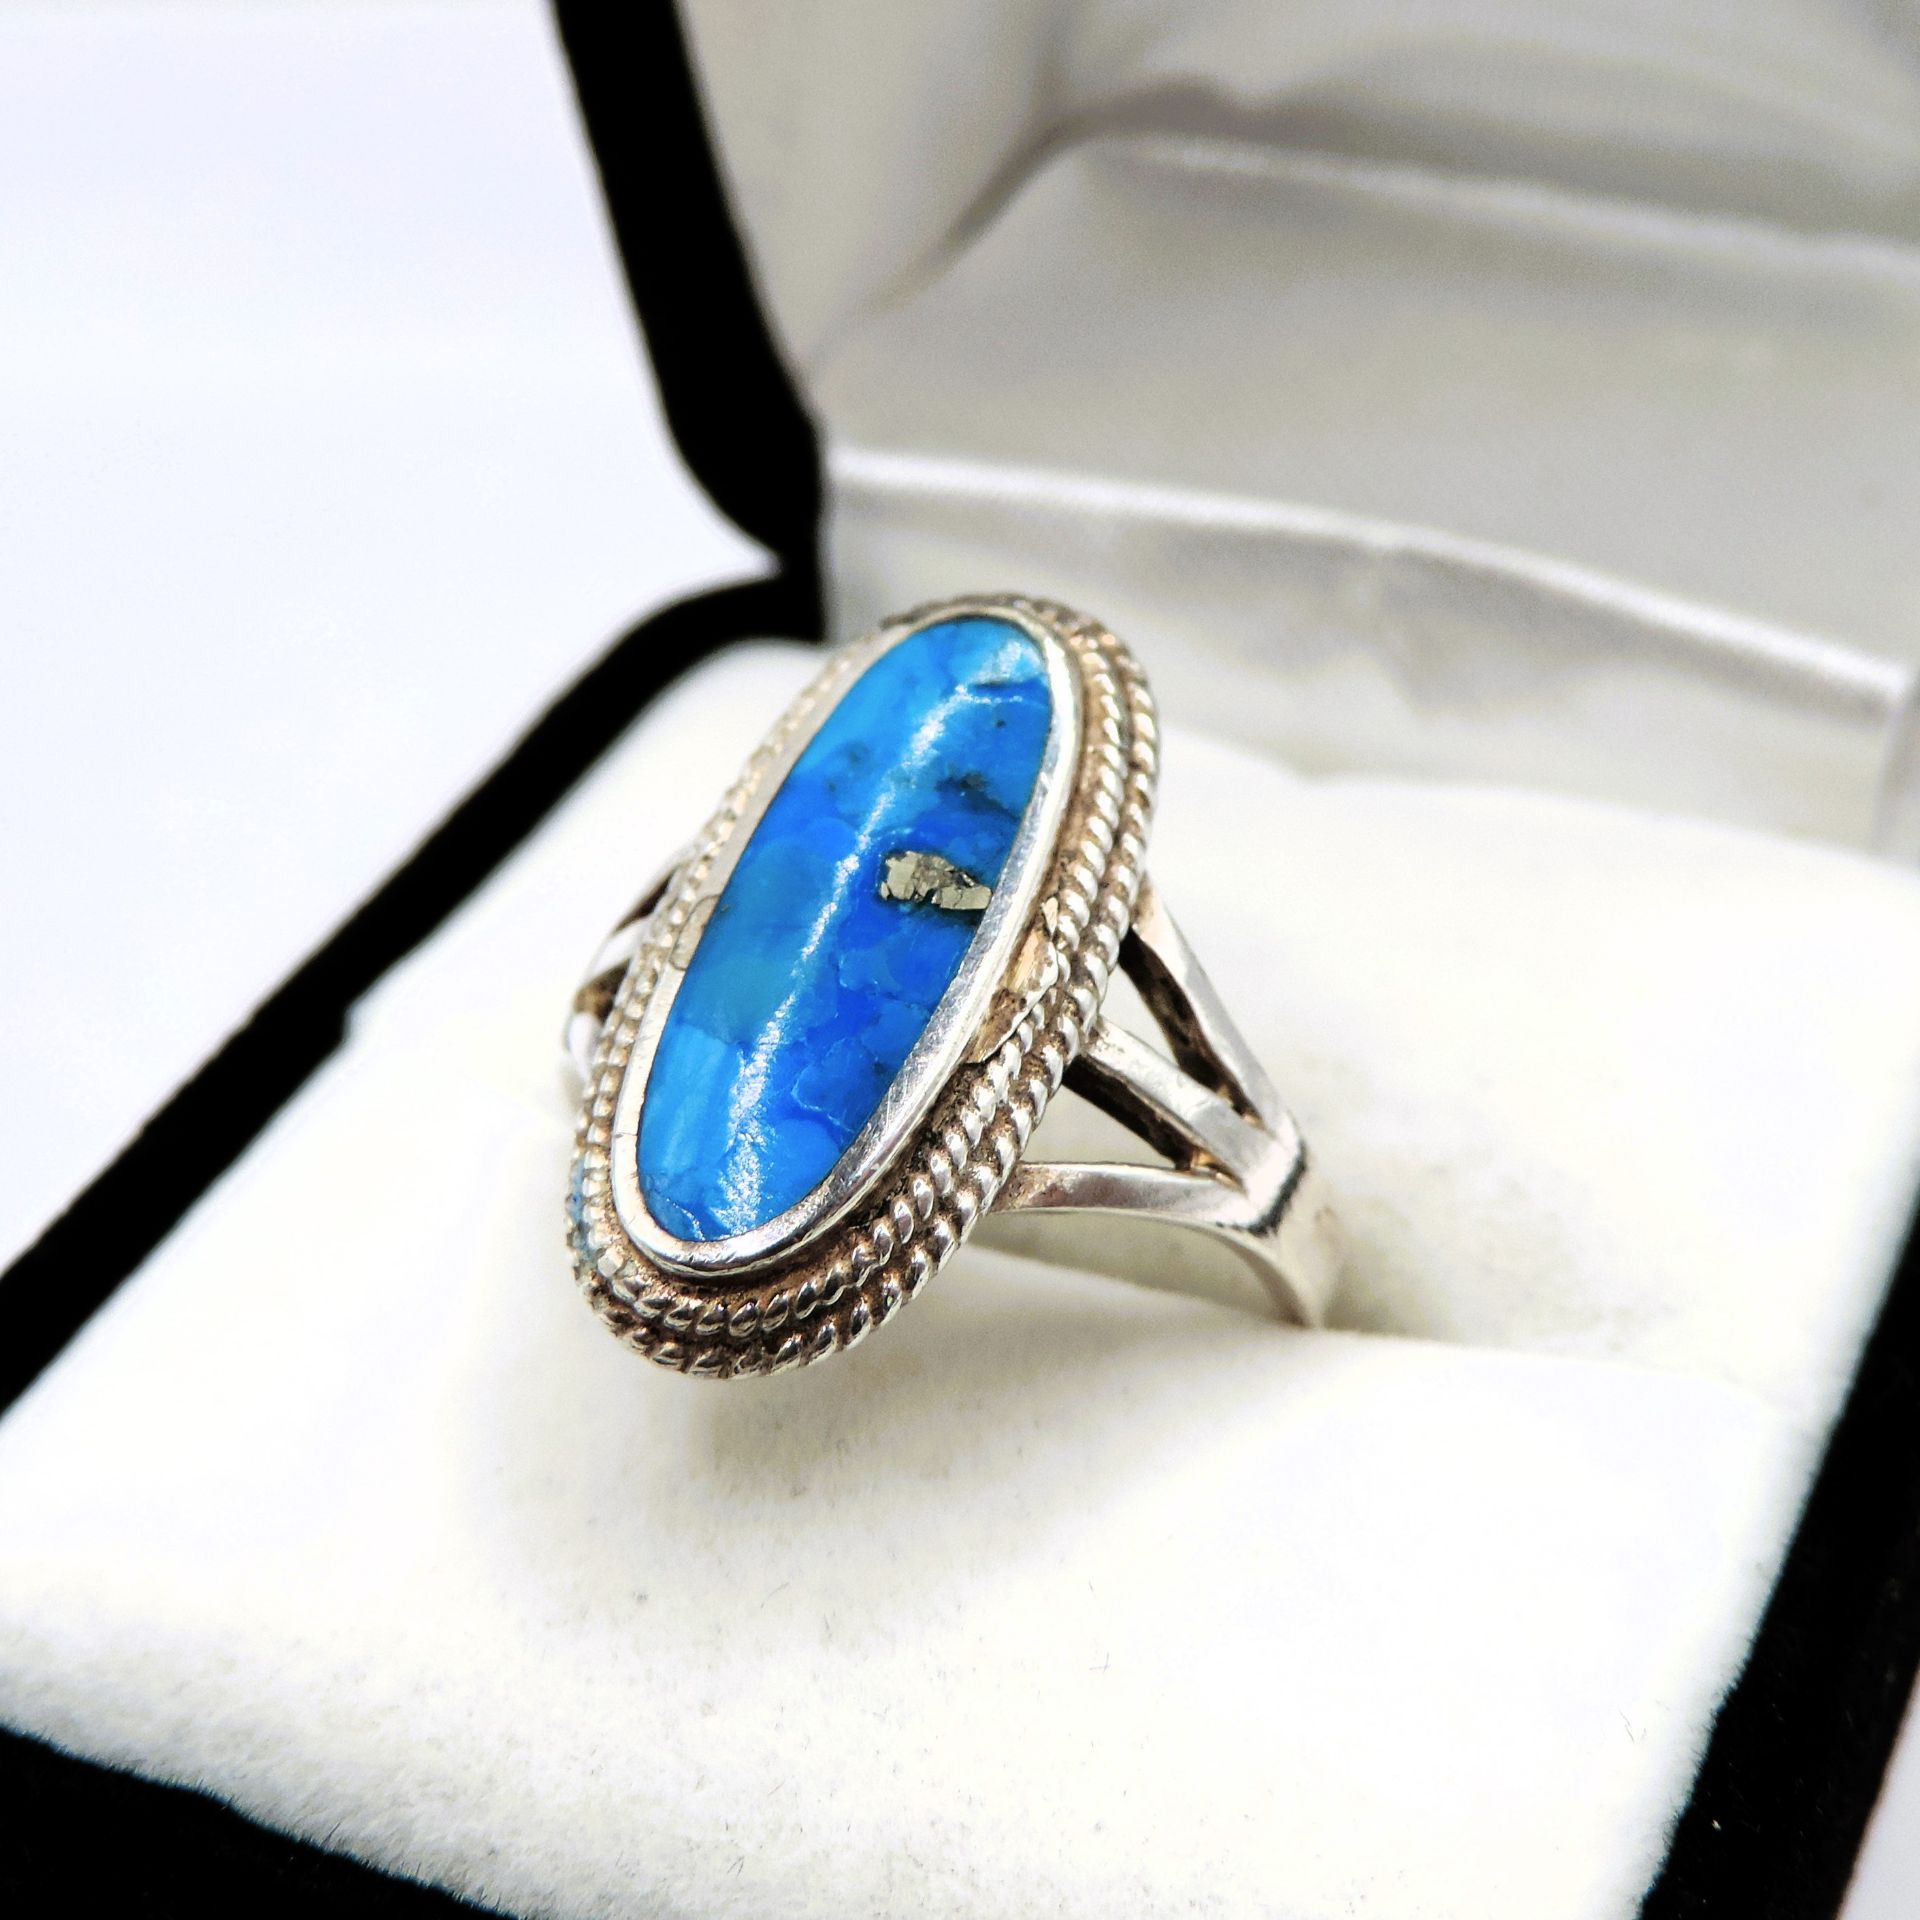 Artisan Sterling Silver Apatite Gemstone Ring. A fine quality Sterling silver ring set with an Apati - Image 3 of 3